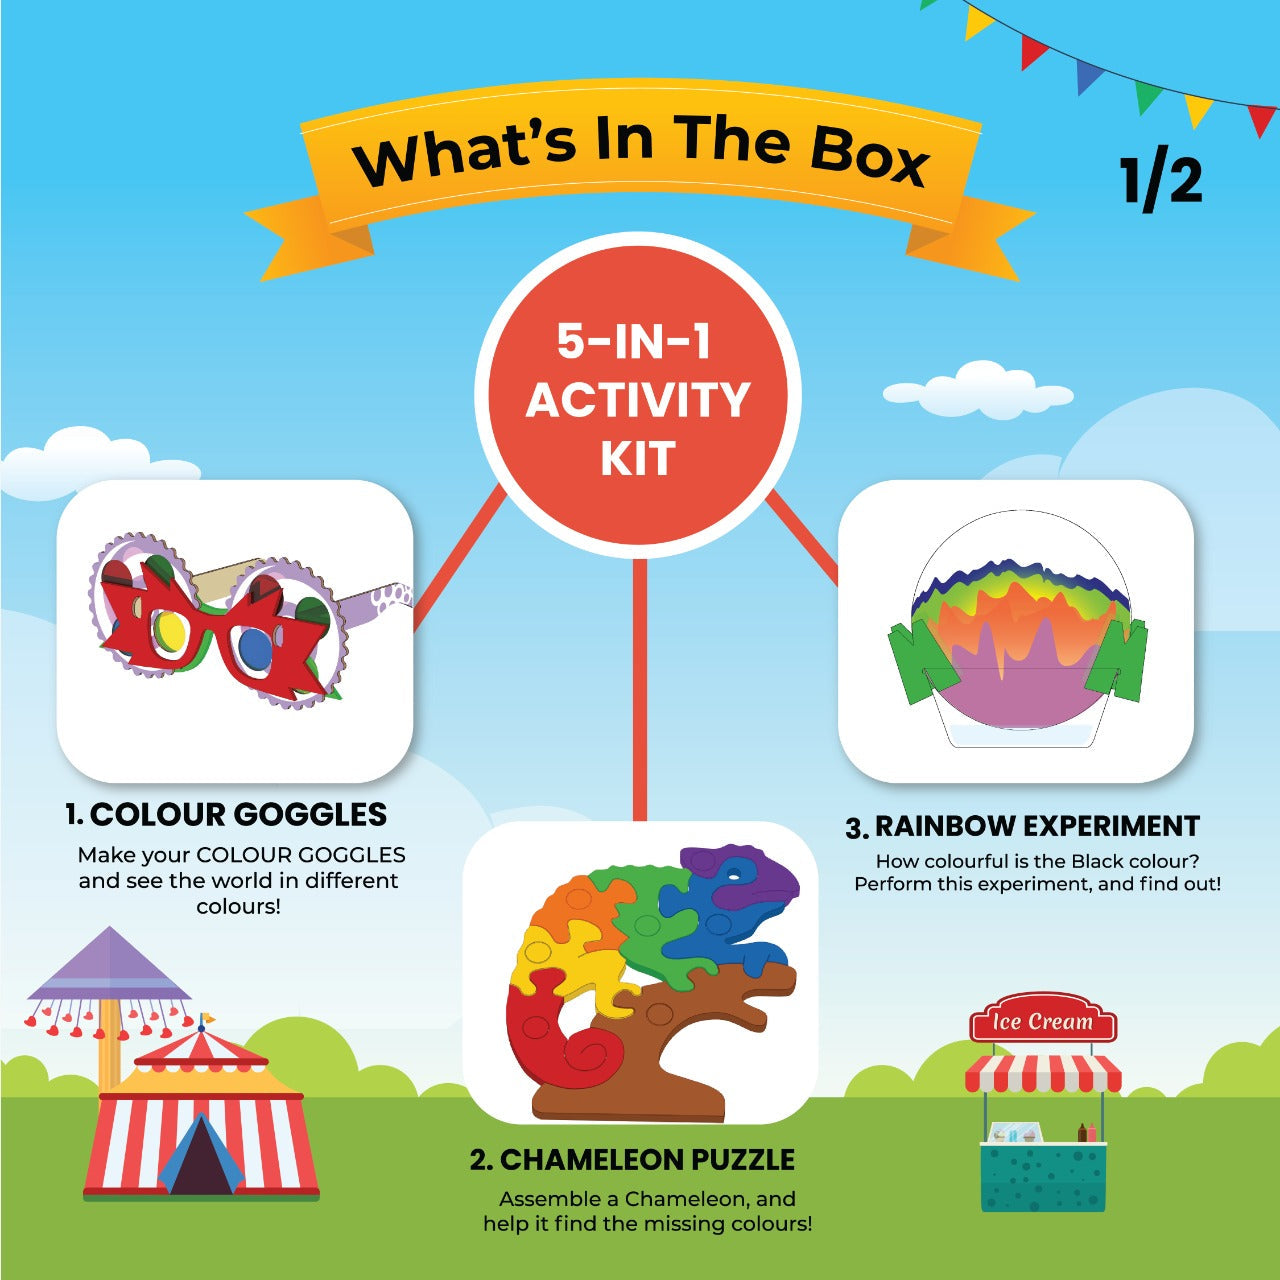 Colour Carnival 5-in-1 Science Kit for 3+ years | Christmas Gifts for Boys & Girls - Smartivity